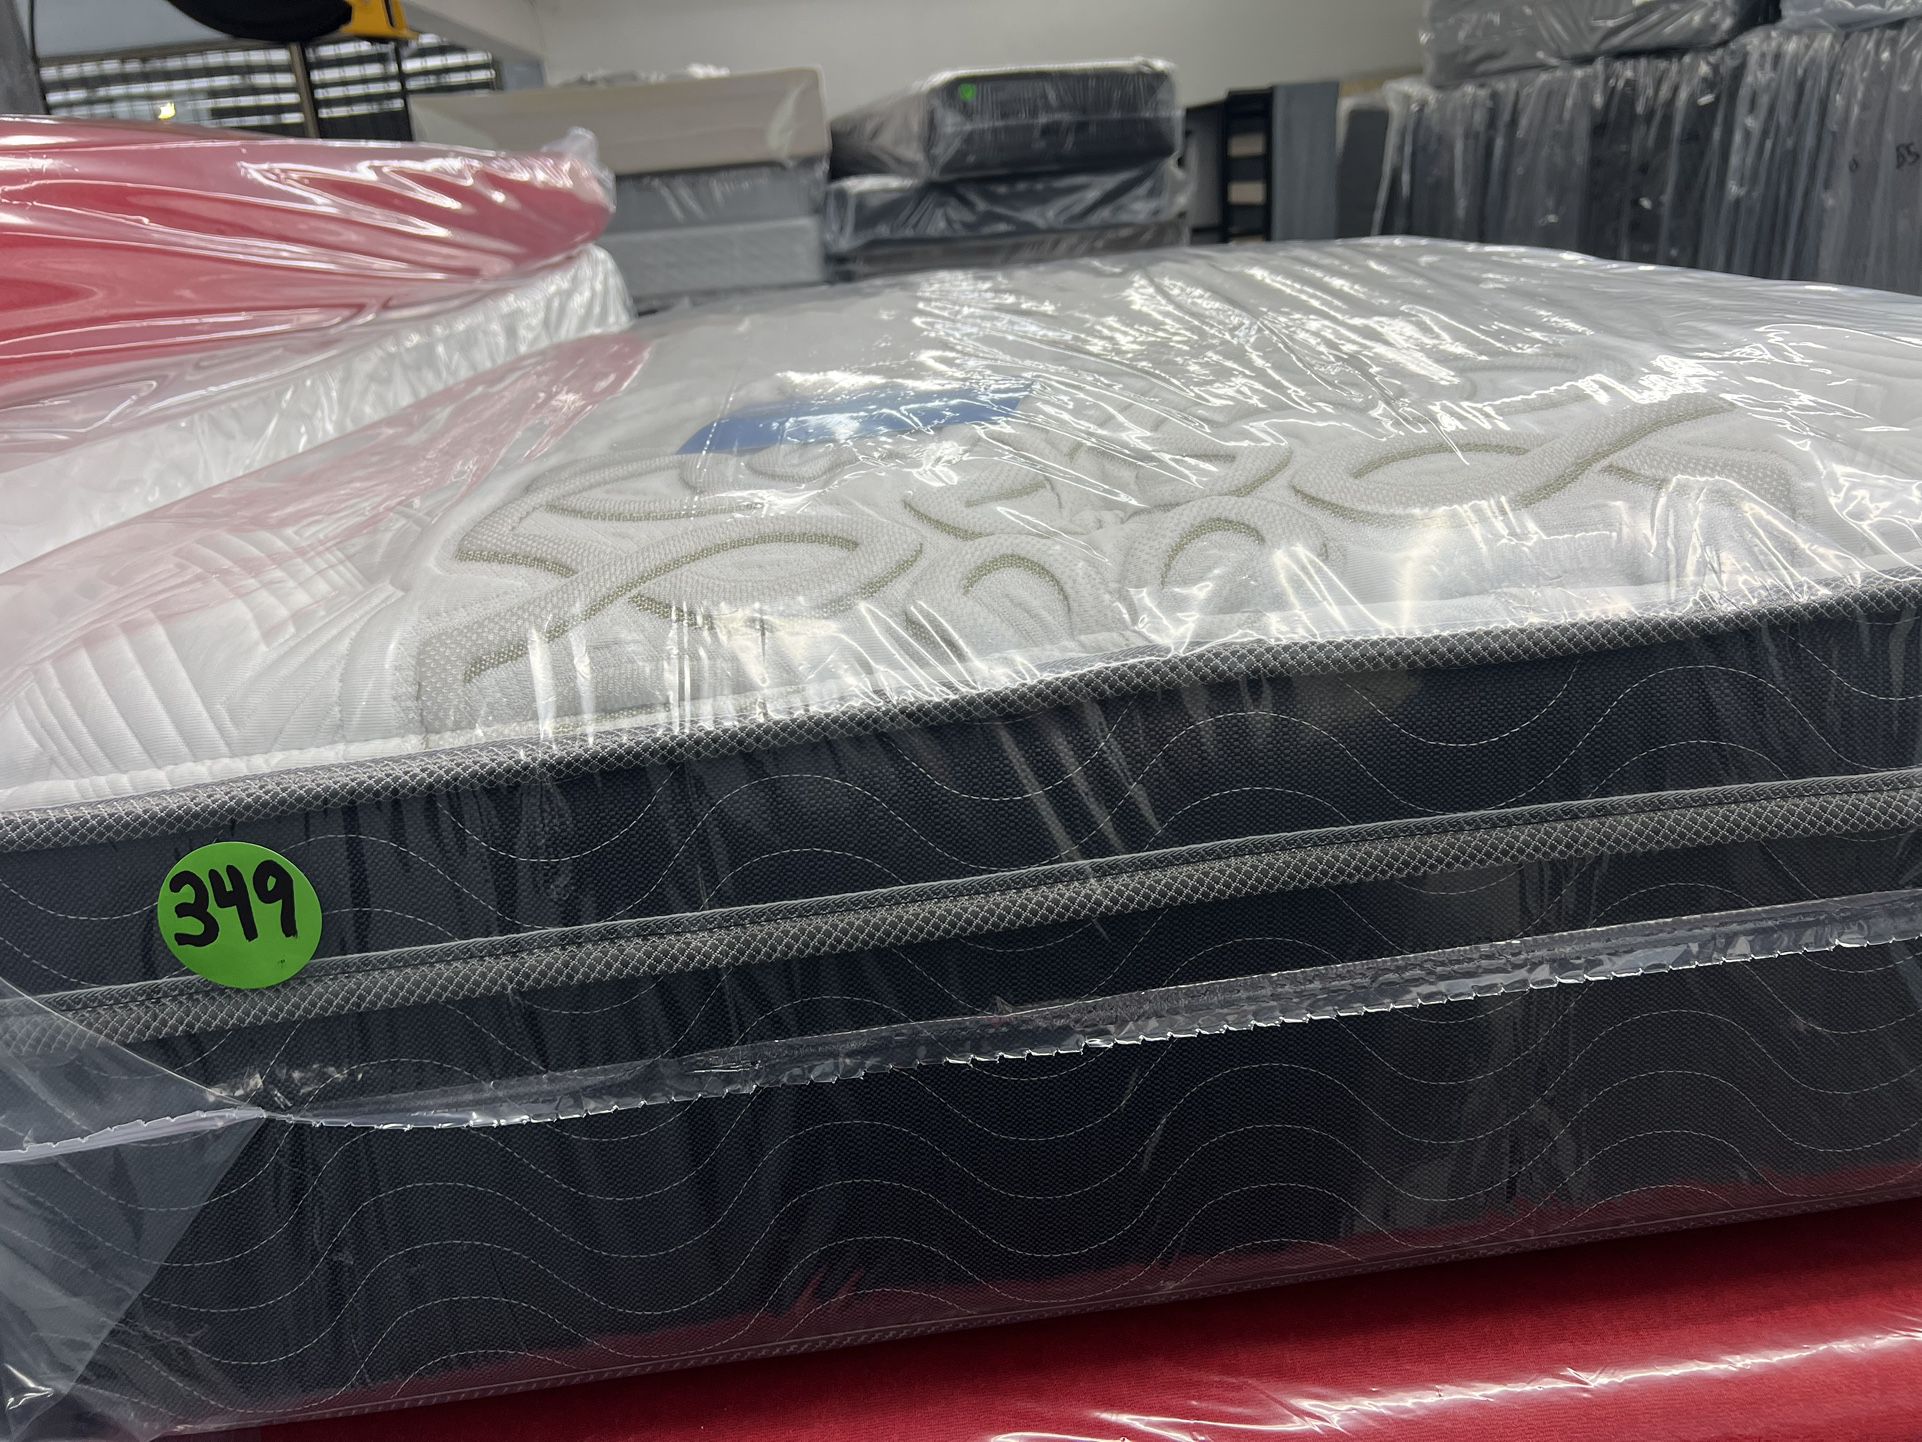 NEW WITH WARRANTY TWIN SIZE SOUTHERLAND EUROTOP MATTRESS & BOX SPRING BED SET